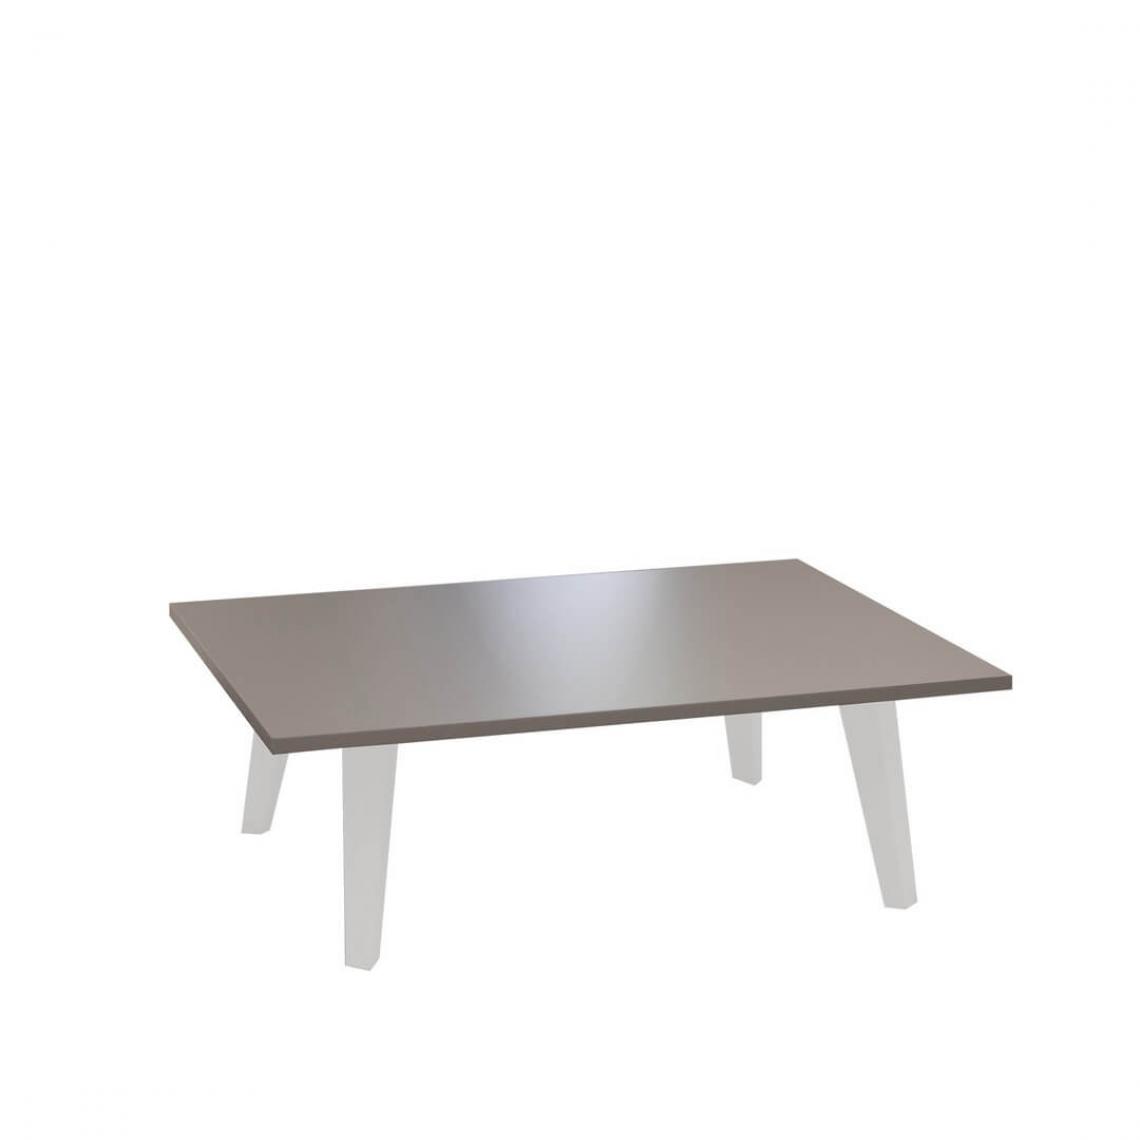 Temahome - Table basse PRISM - taupe - Tables basses